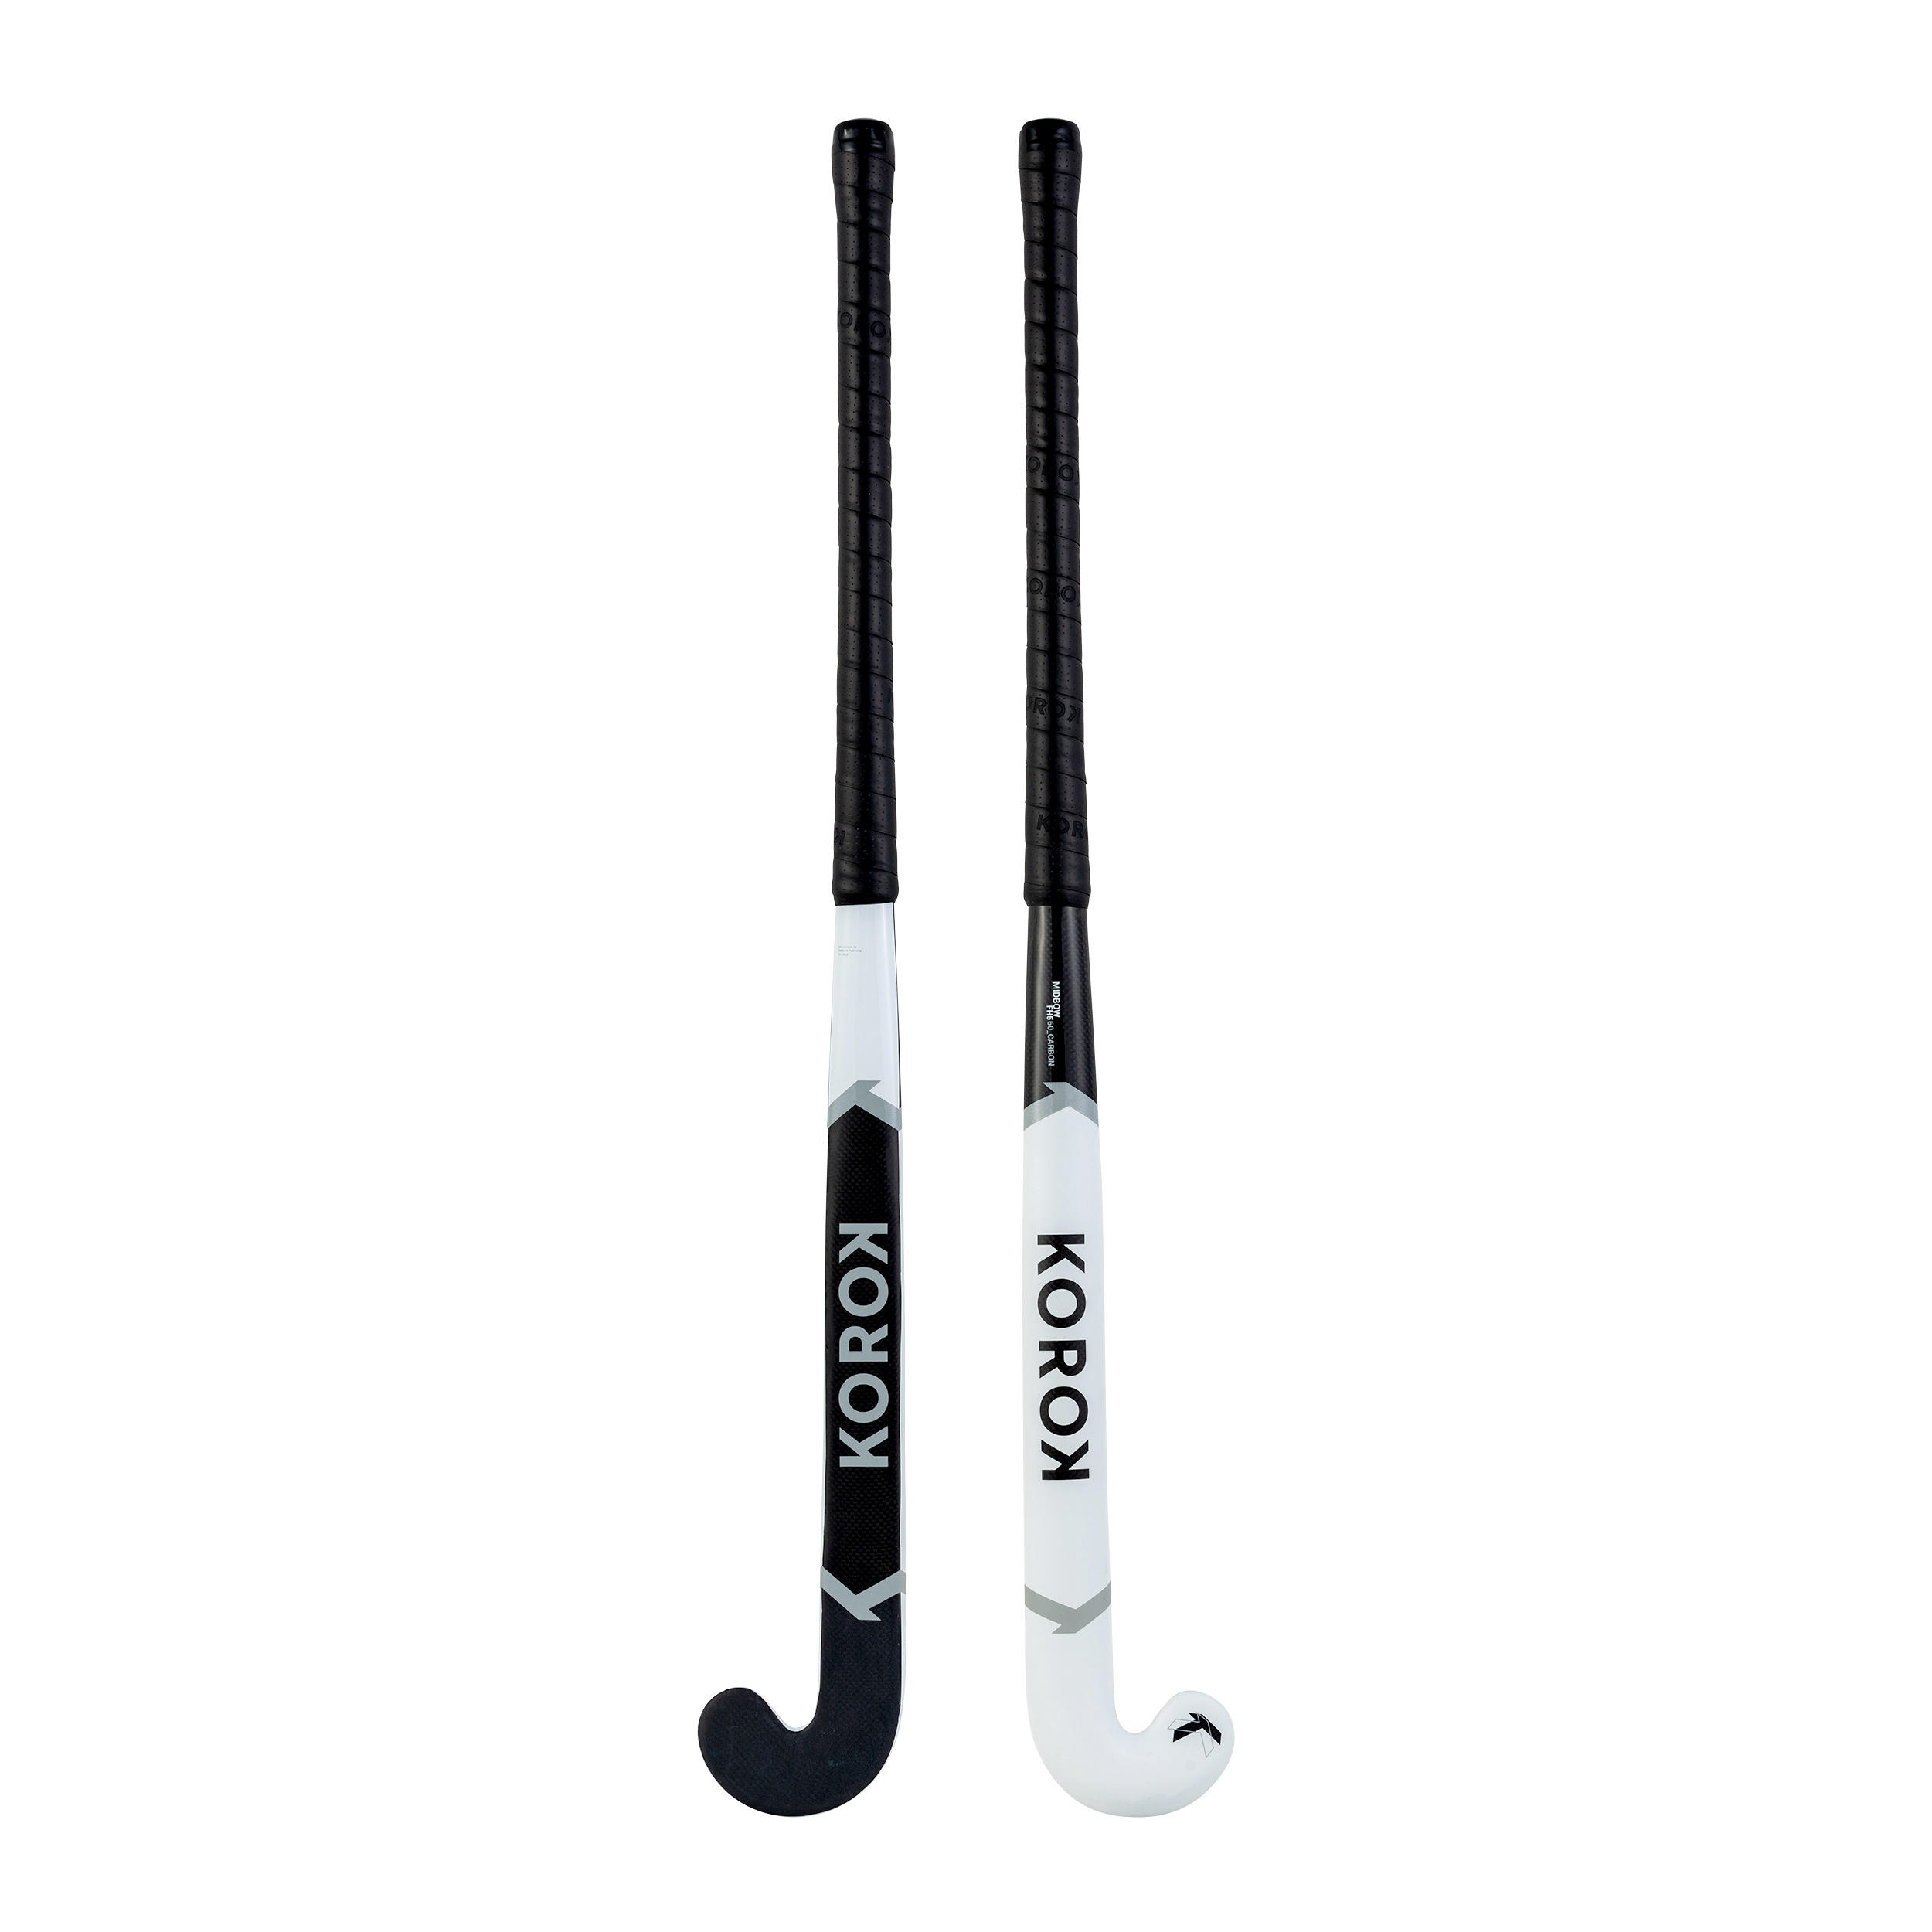 Adult Intermediate 60% Carbon Mid Bow Field Hockey Stick FH560 - White/Grey 6/12